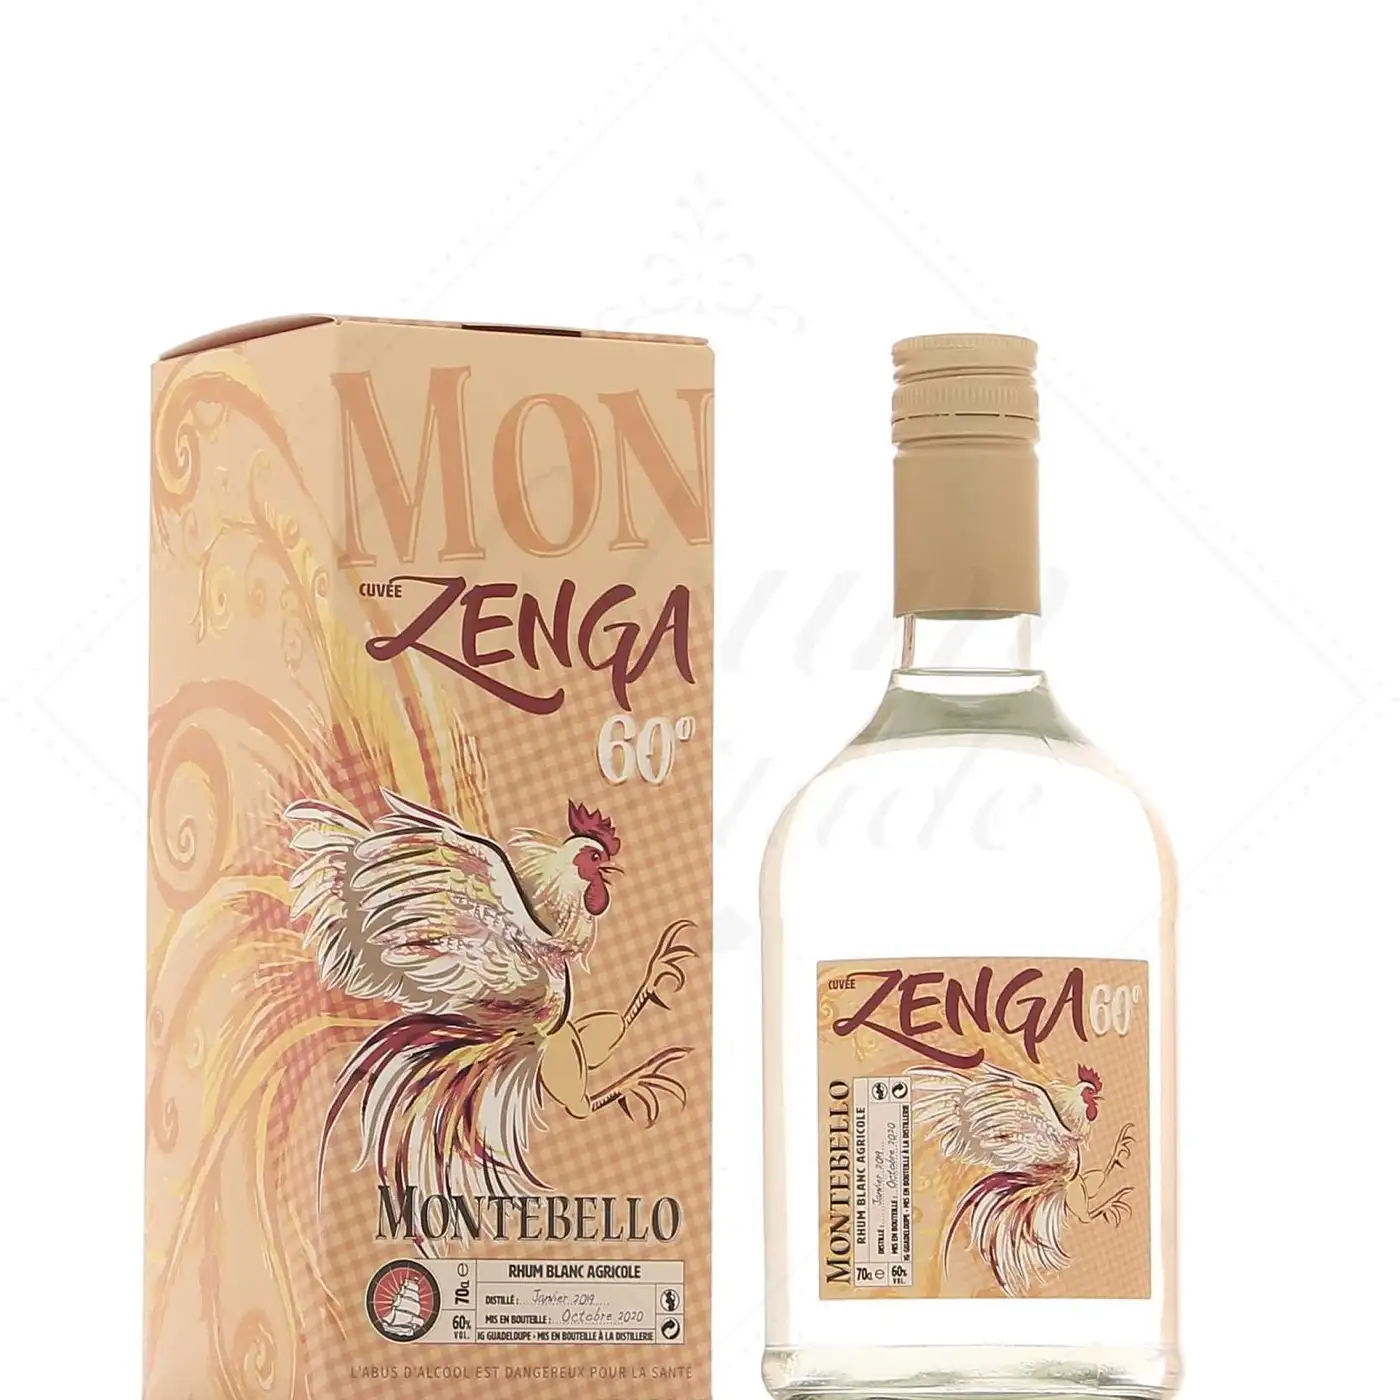 Image of the front of the bottle of the rum Montebello Zenga 60°